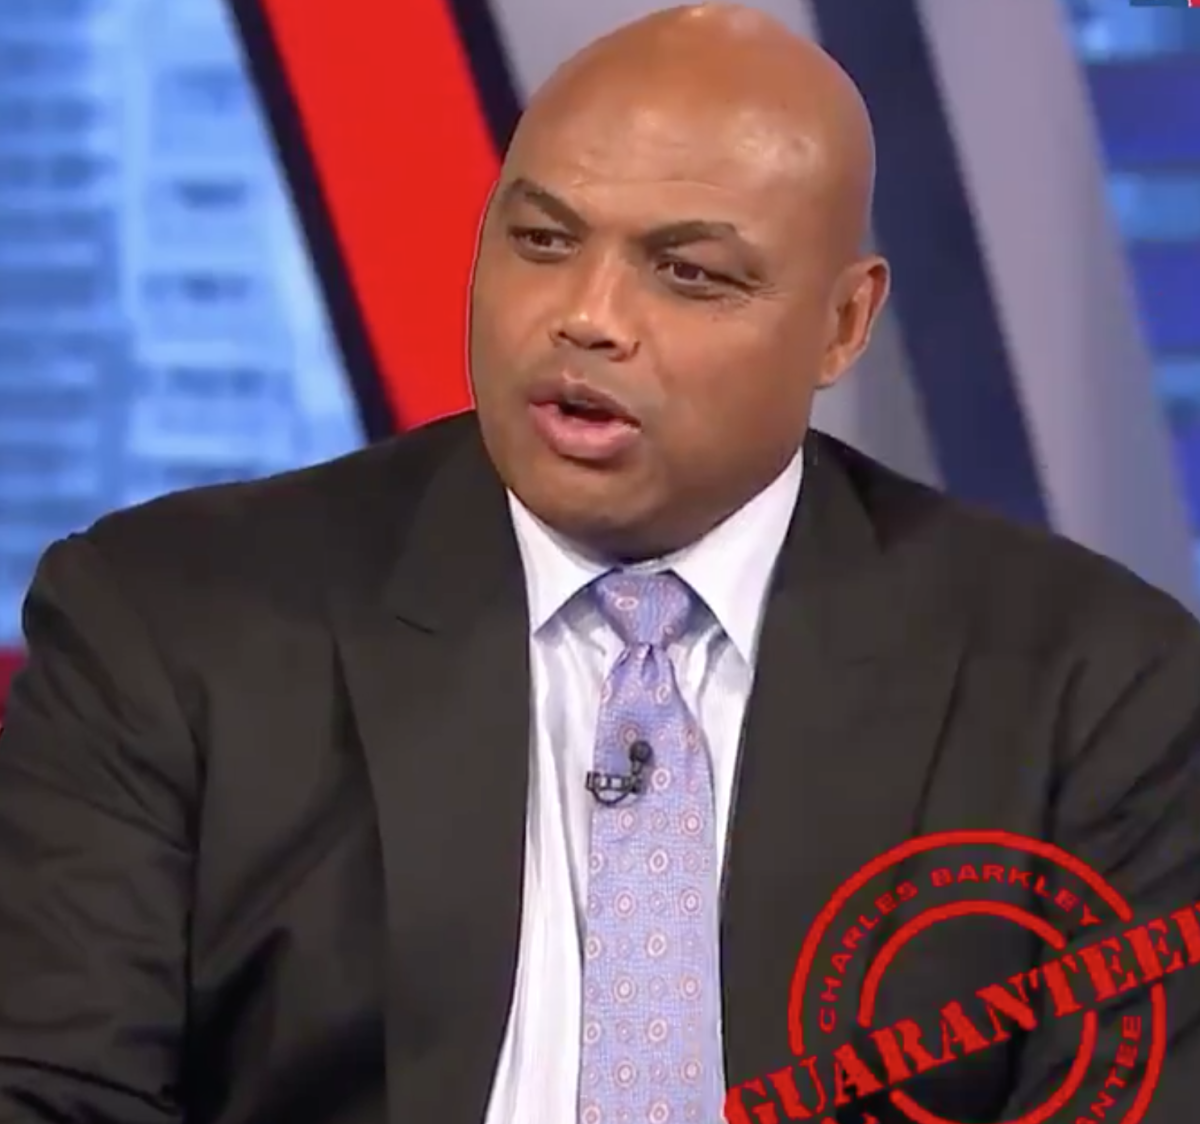 Charles Barkley Roasts James Harden's Pre-Game Outfit: That's